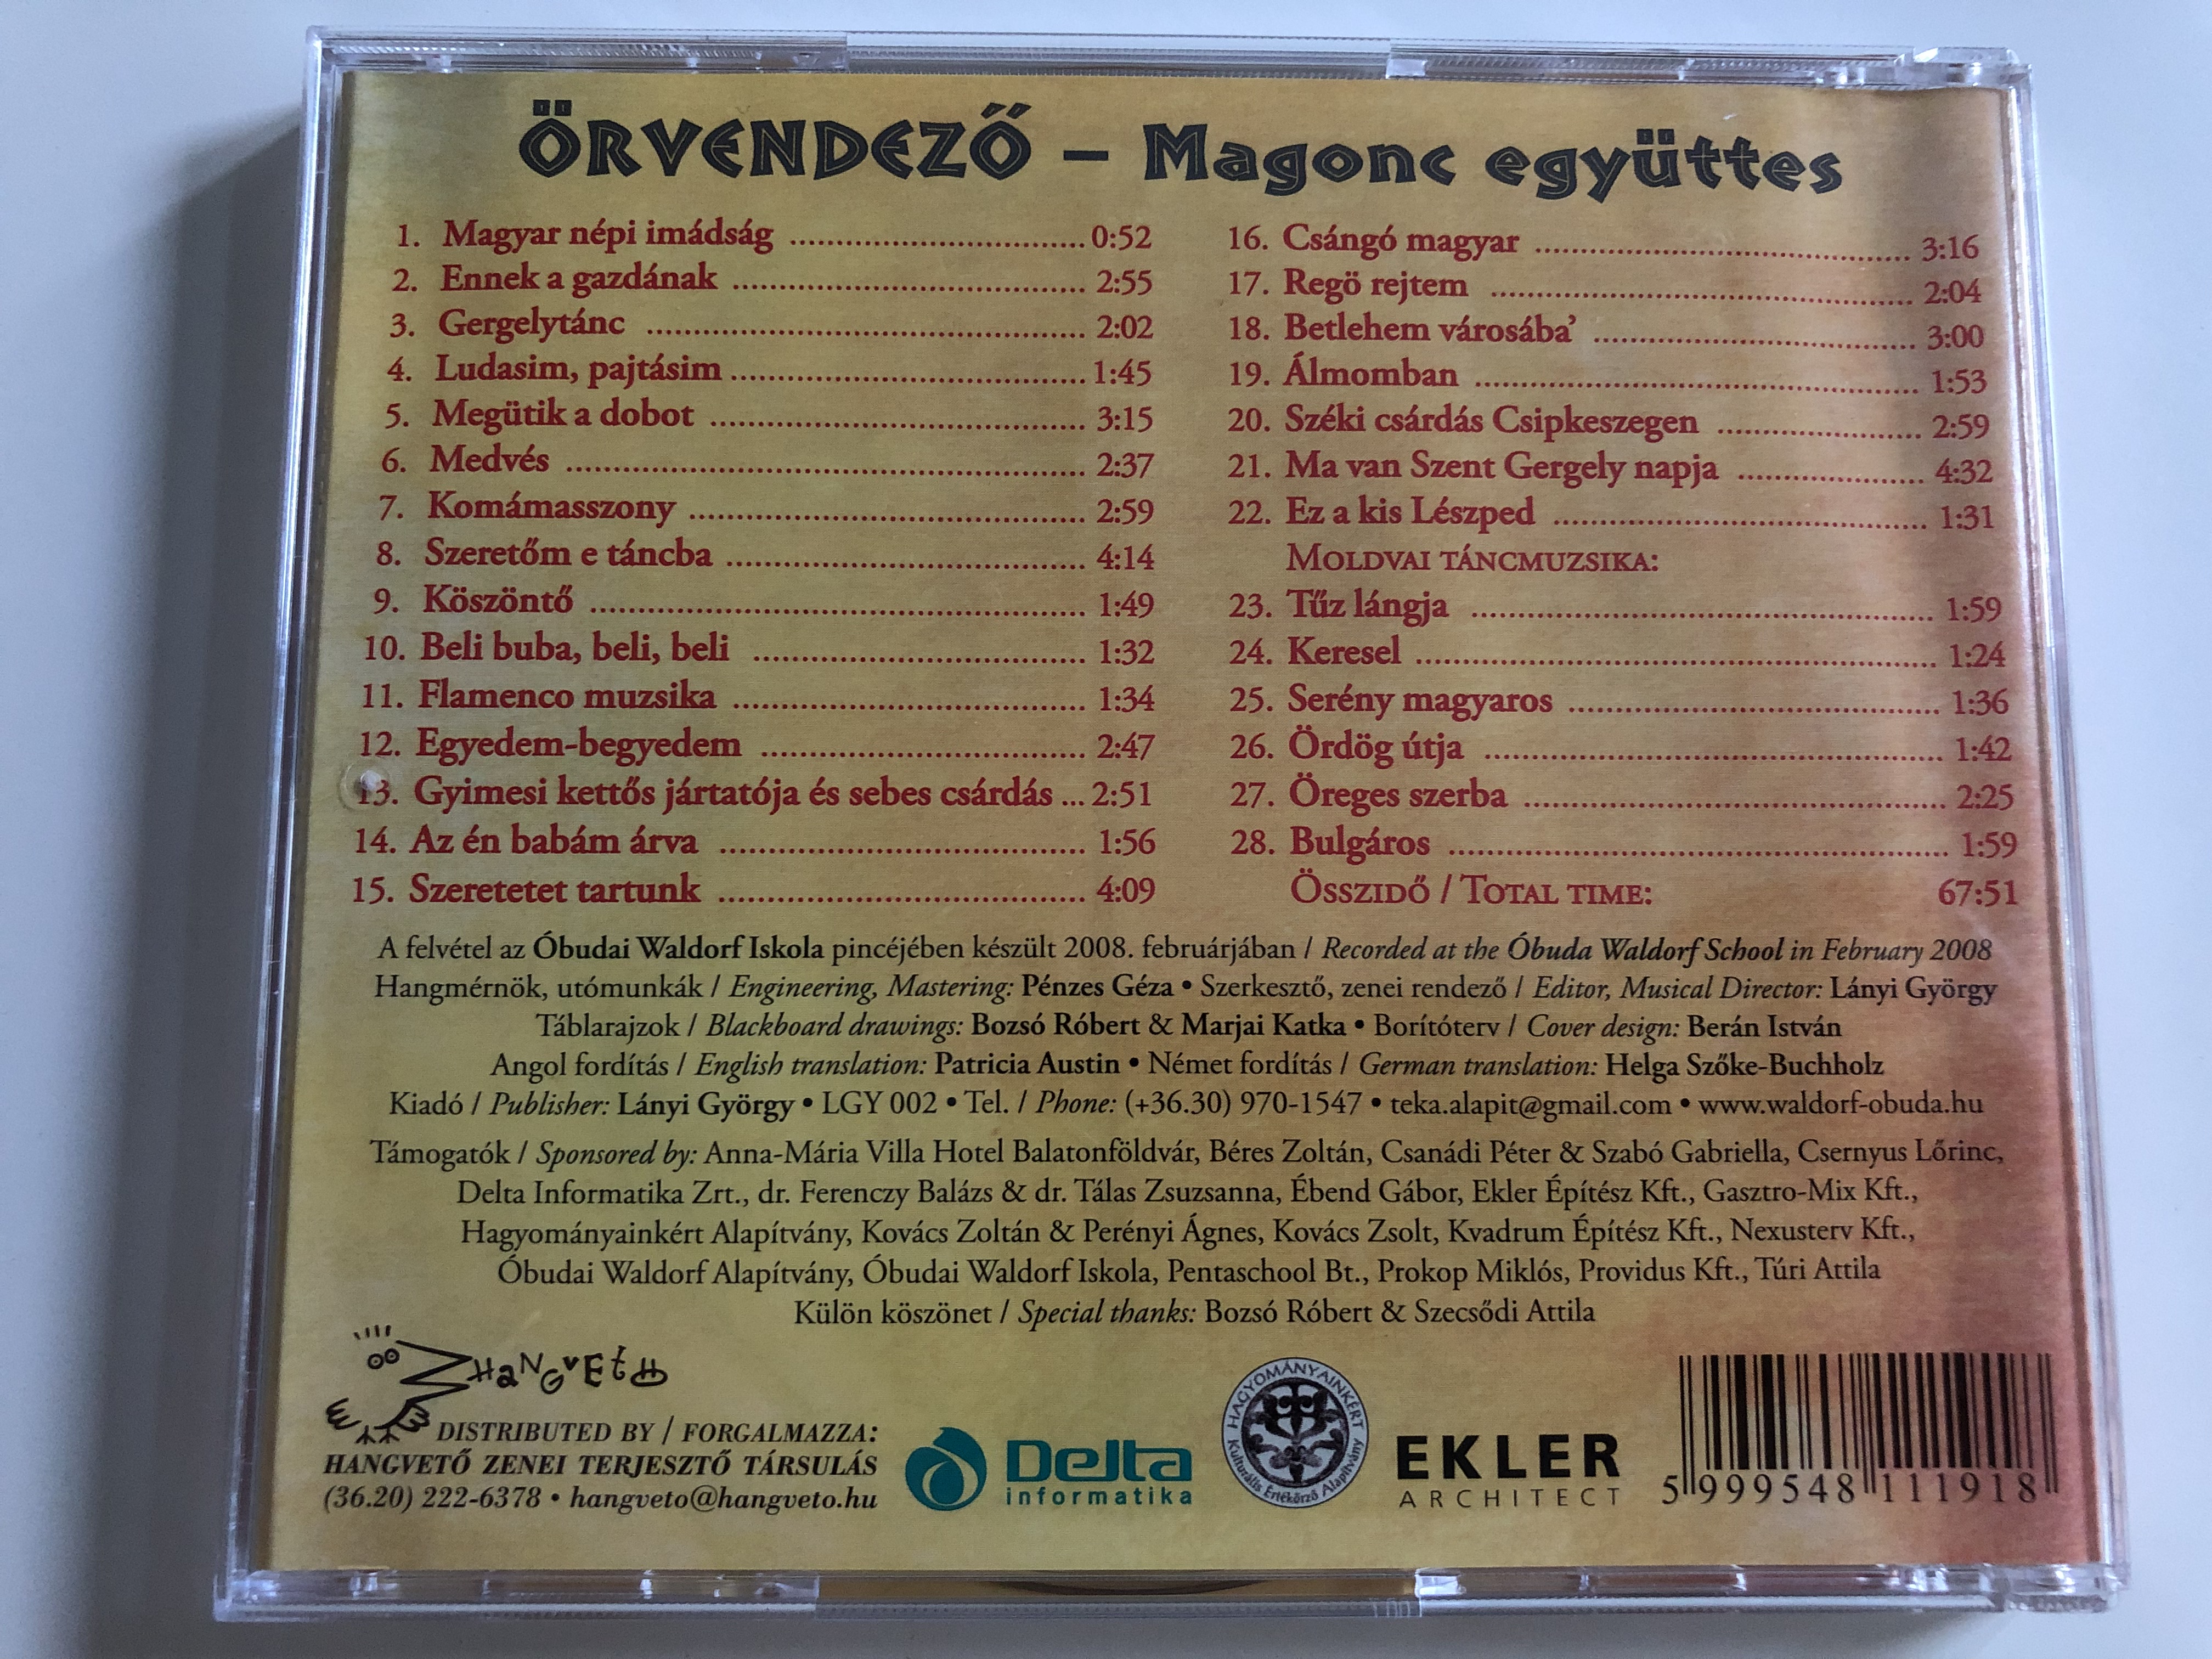 -magonc-egy-ttes-rvendez-audio-cd-2008-recorded-at-the-buda-waldorf-school-hungarian-children-s-songs-and-rhymes-12-.jpg